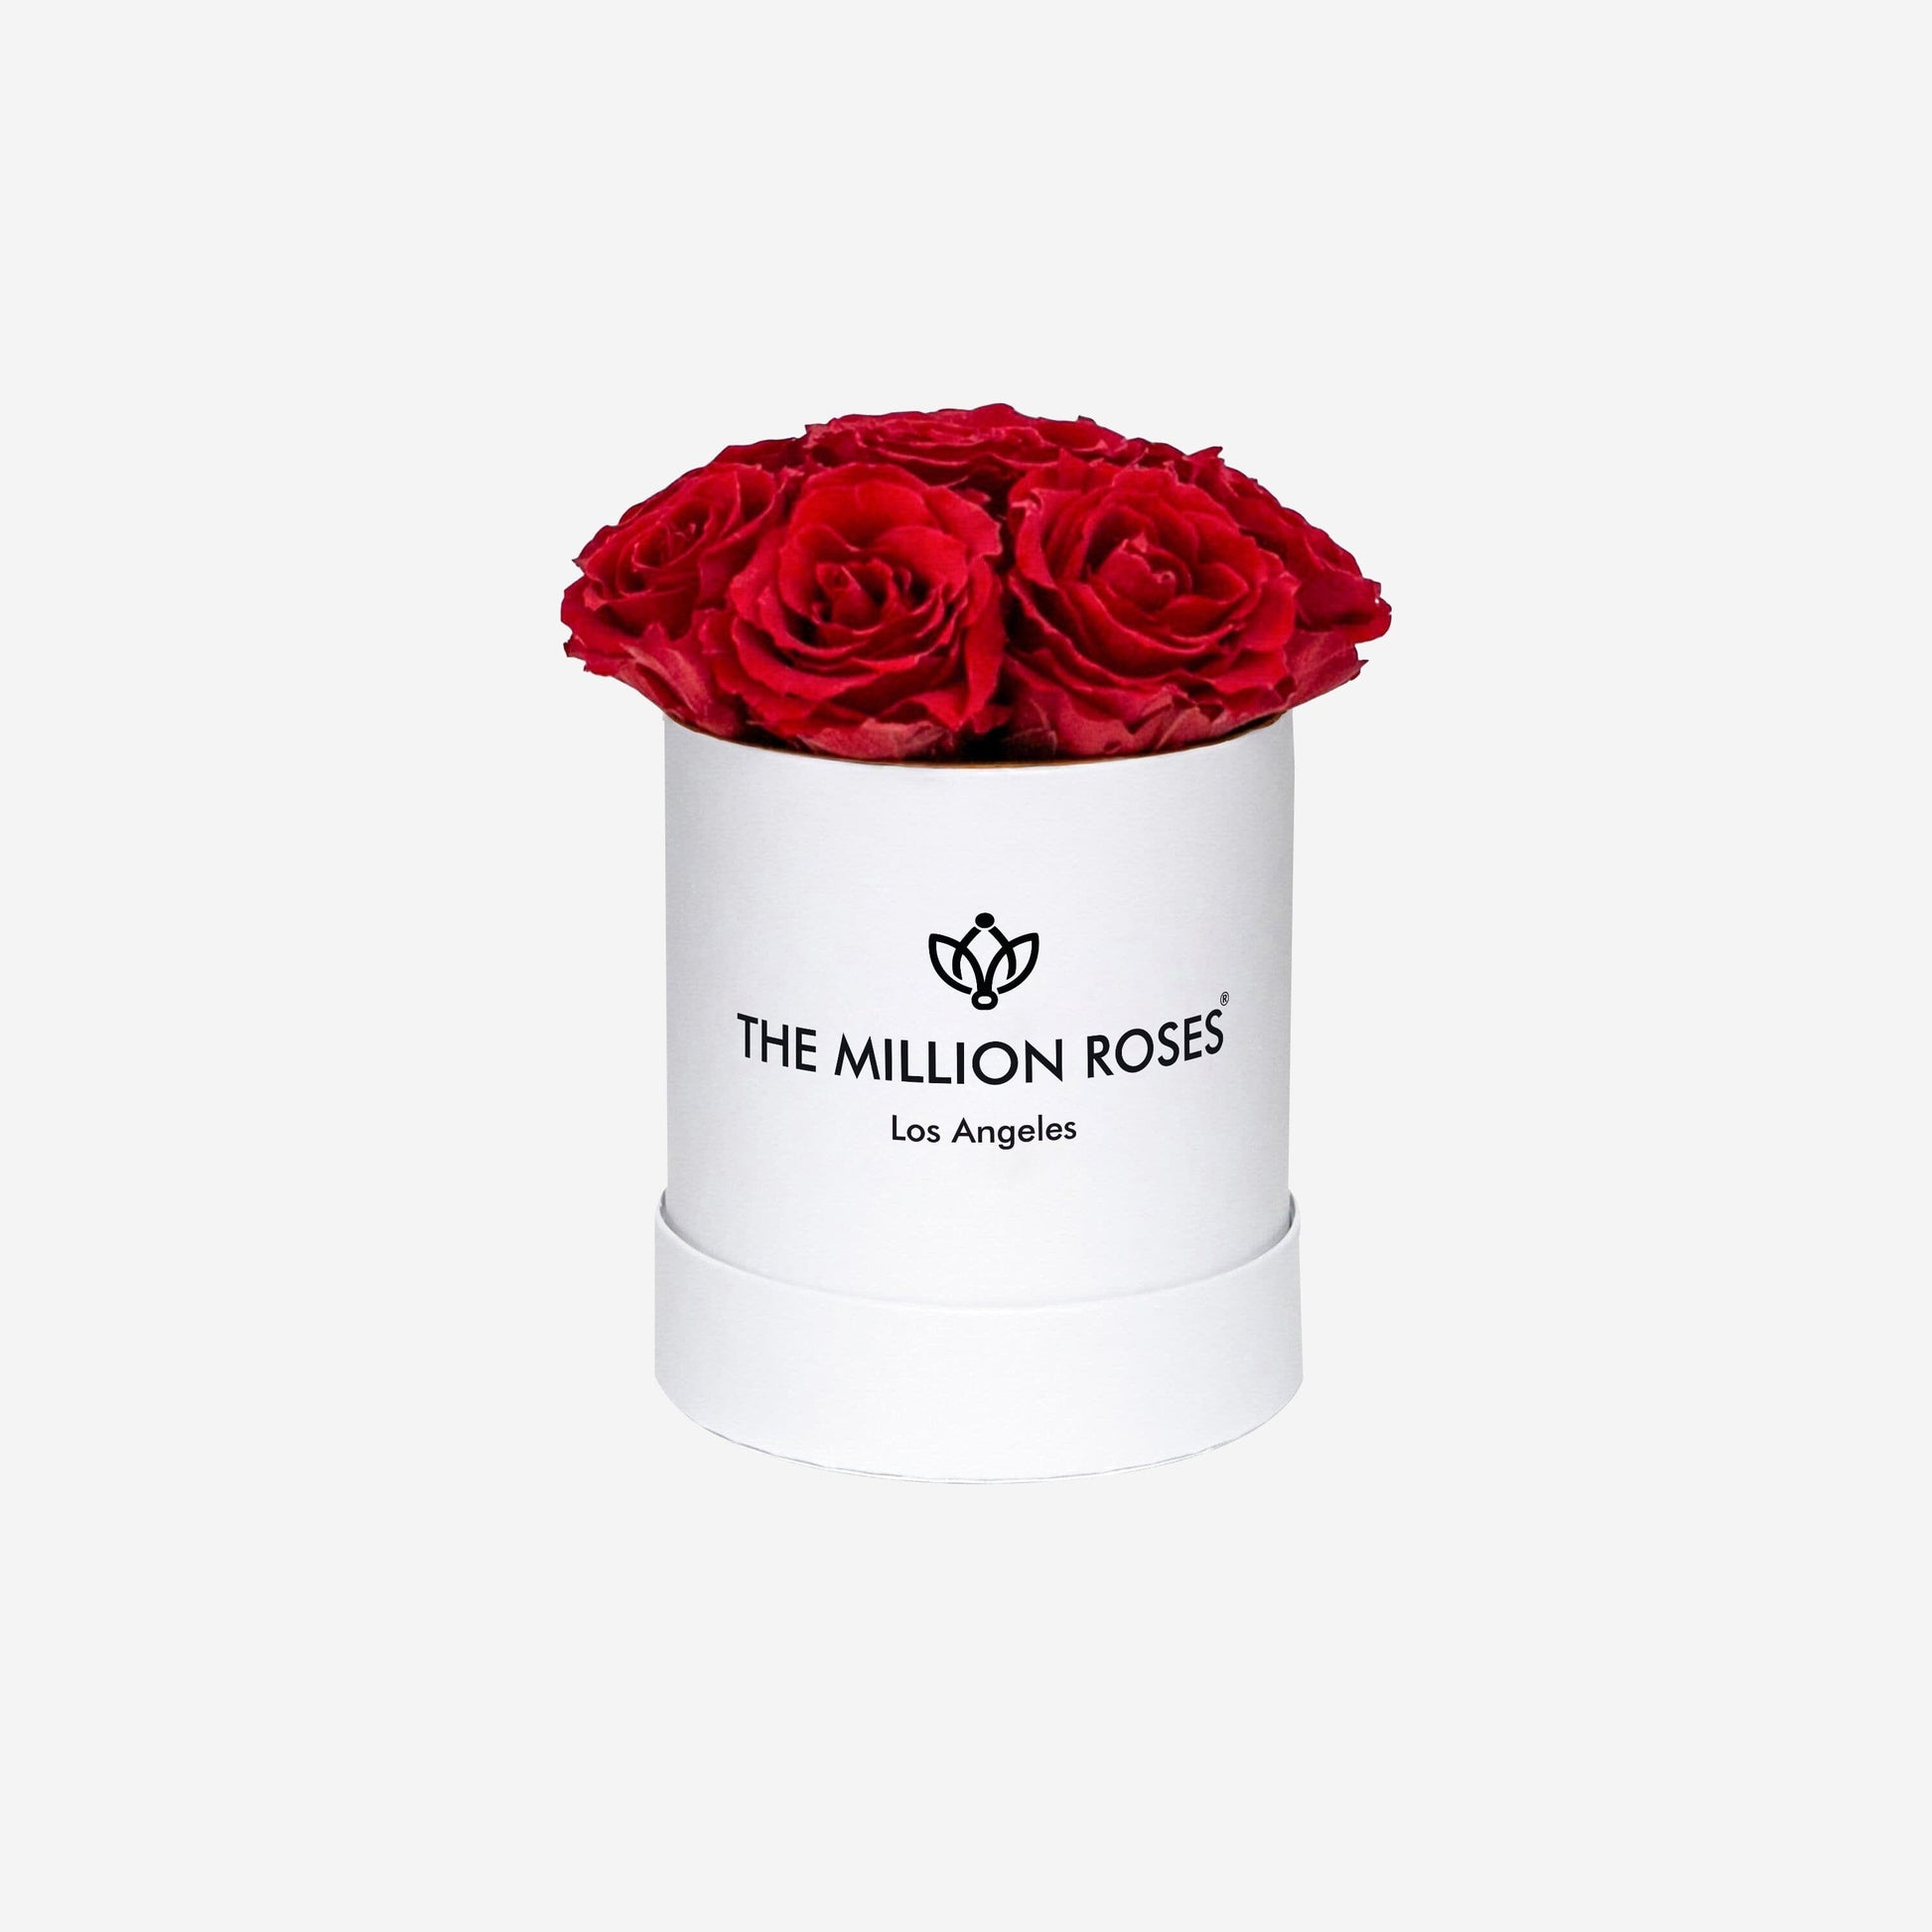 CLASSIC ROSES ARE RED BOX ARRANGEMENT - Red Roses And Million Stars